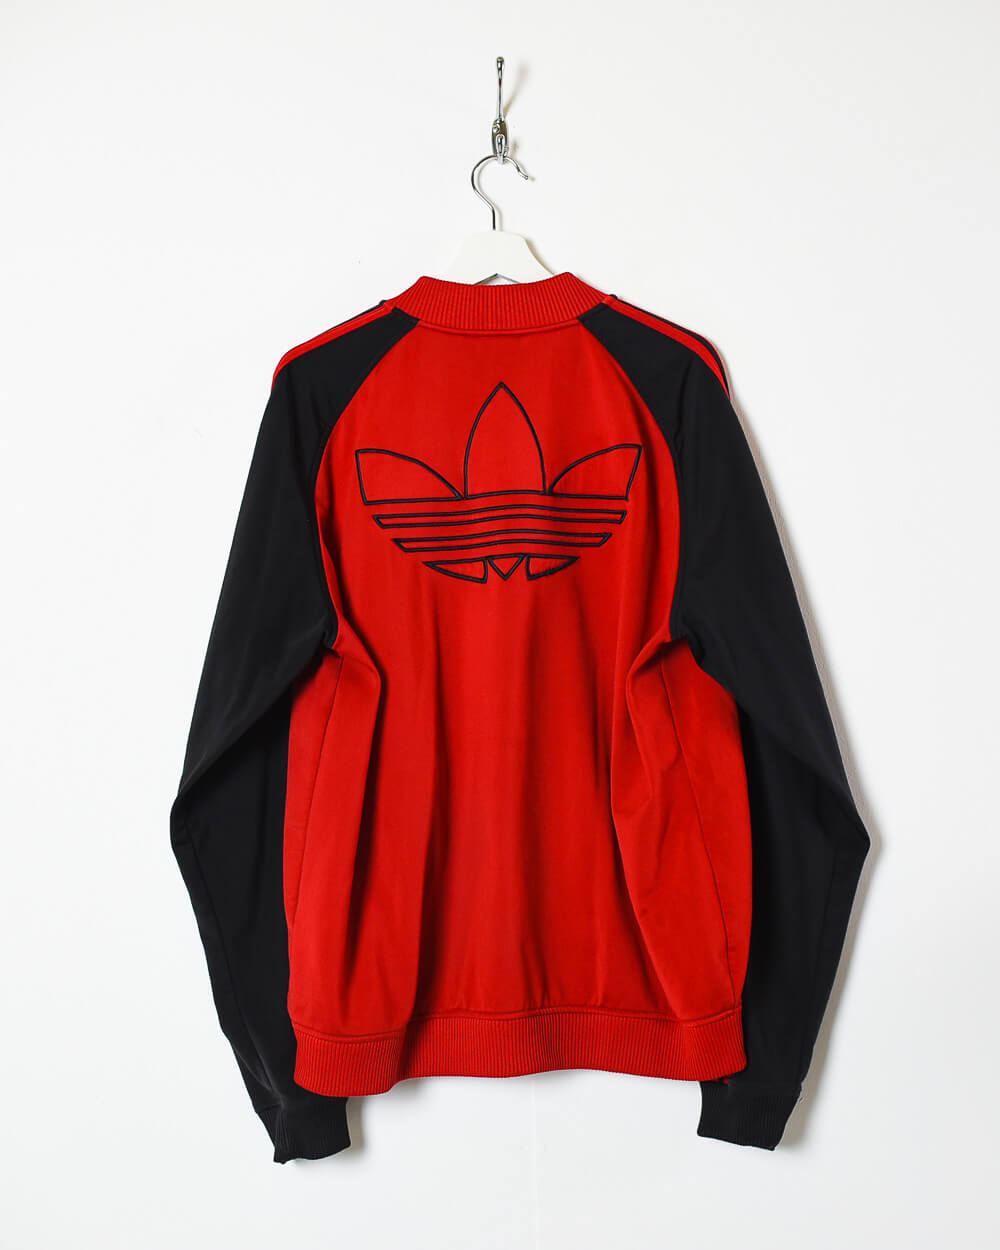 Red Adidas Tracksuit Top - X-Large